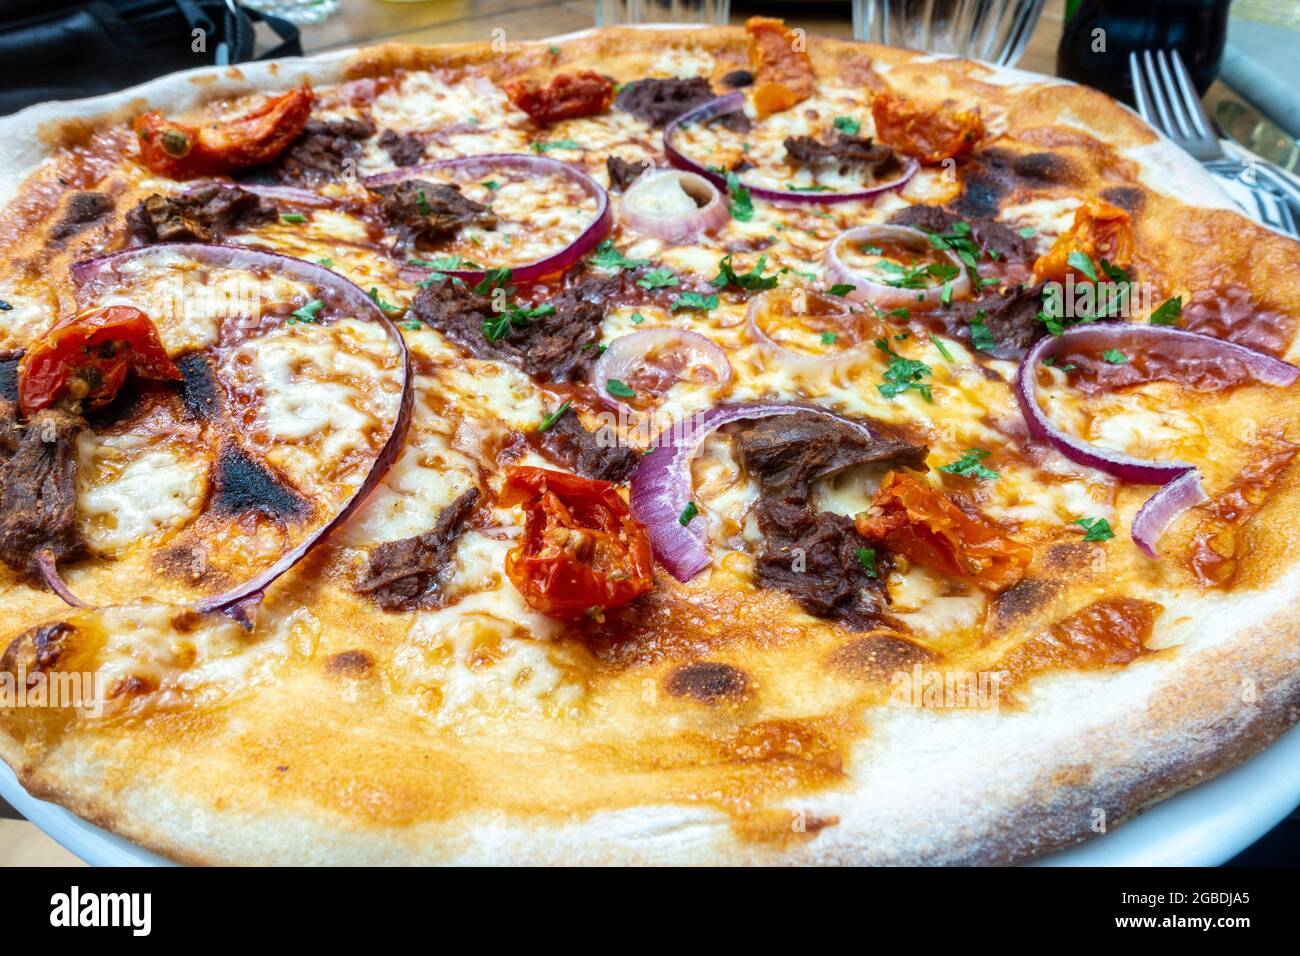 An Italian thin crust pizza with red onion, beef and cheese at a restaurant. Stock Photo